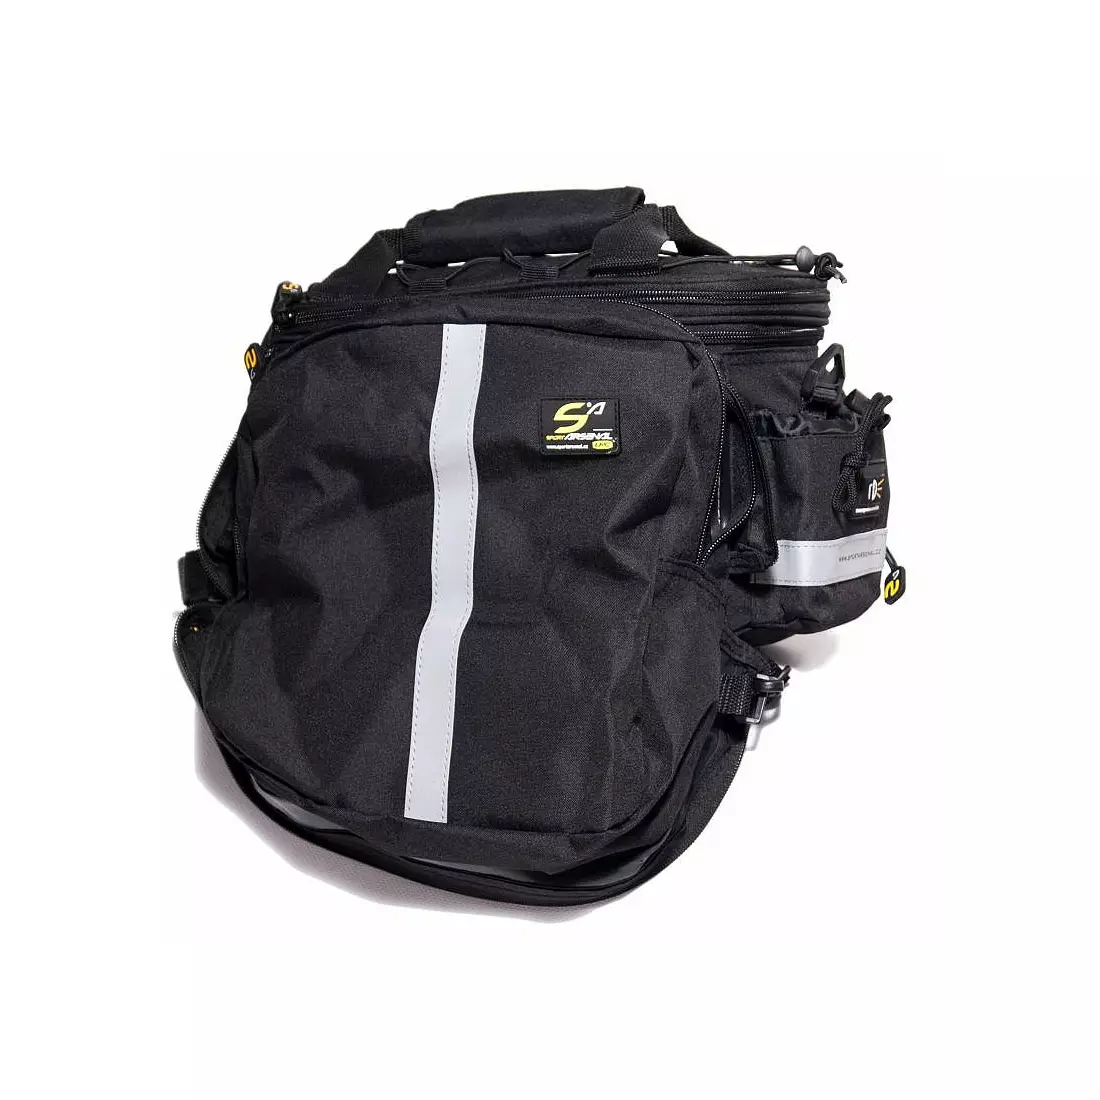 SPORT ARSENAL 480 bicycle pannier for the rack